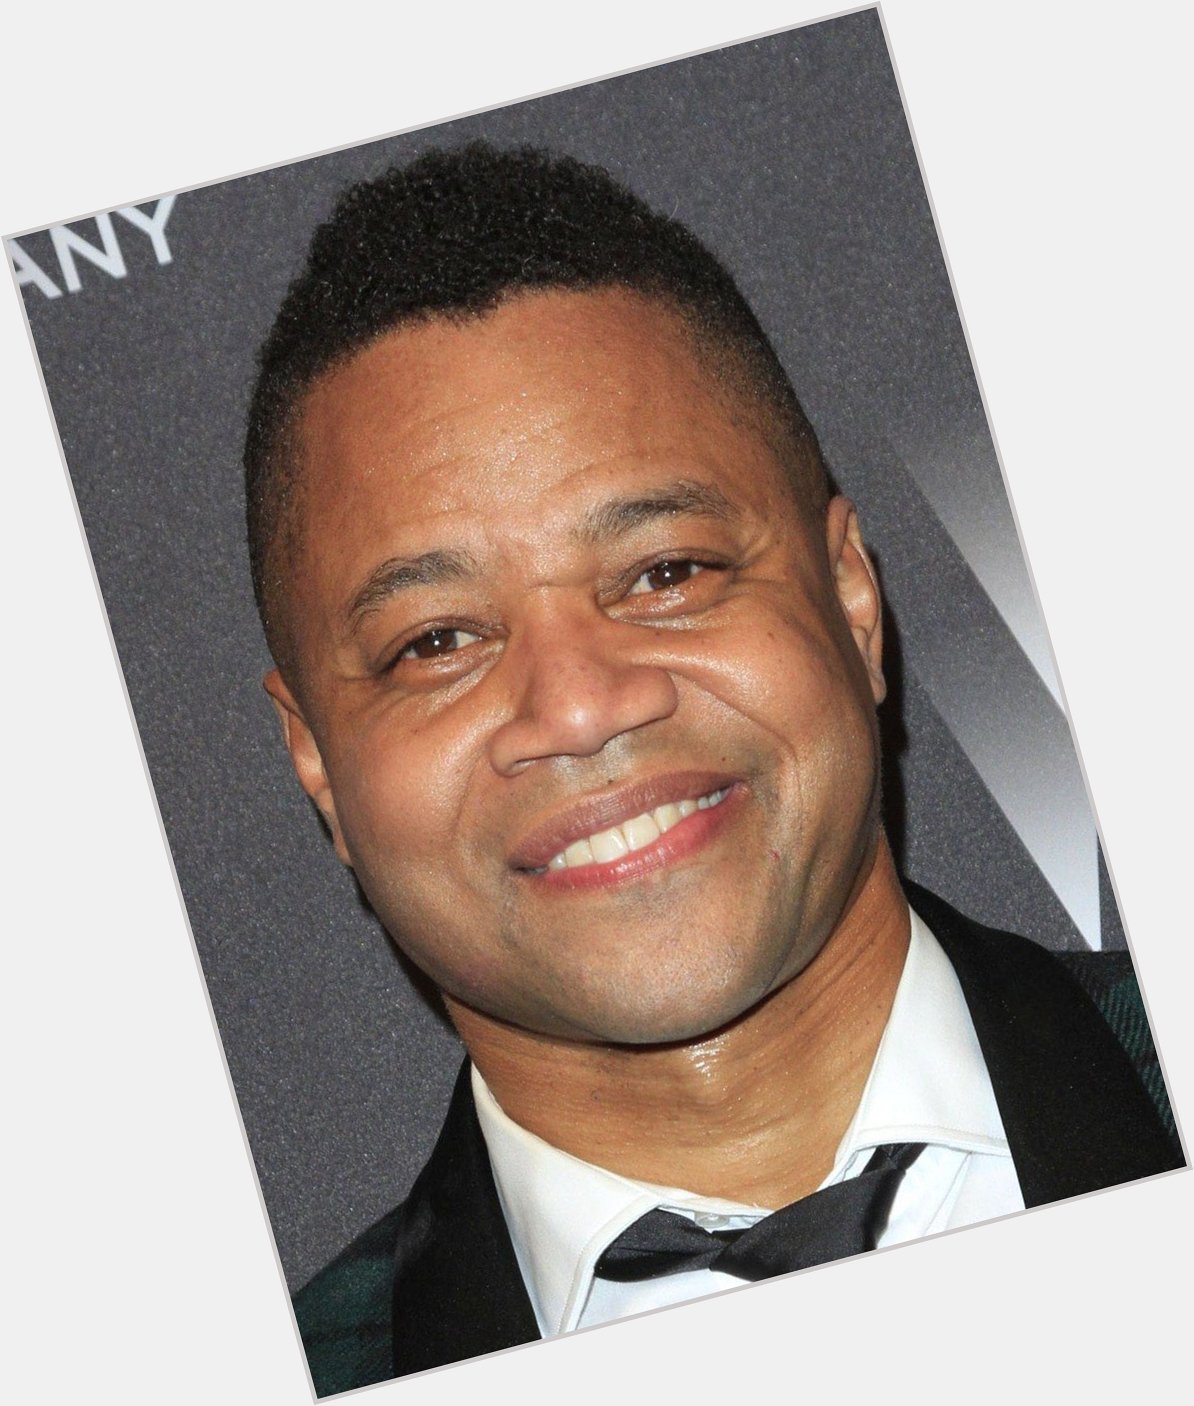 Wishing a Happy 53rd Birthday to Cuba Gooding Jr!Love all of your movies and acting!God bless you!       